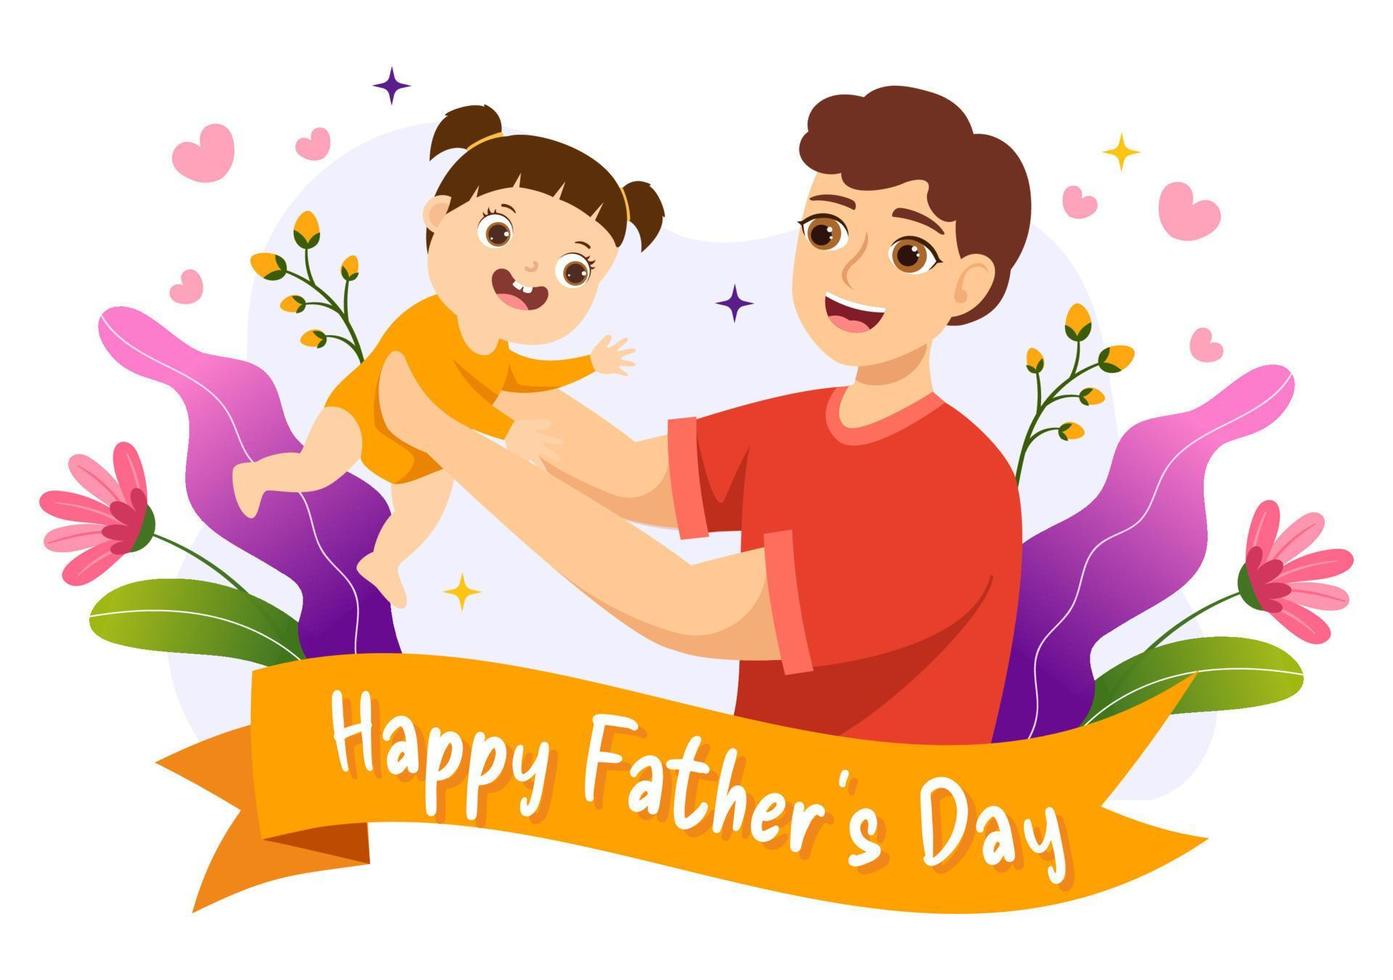 Happy Fathers Day Illustration with Father and his Son Playing Together in Flat Kids Cartoon Hand Drawn for Web Banner or Landing Page Templates vector